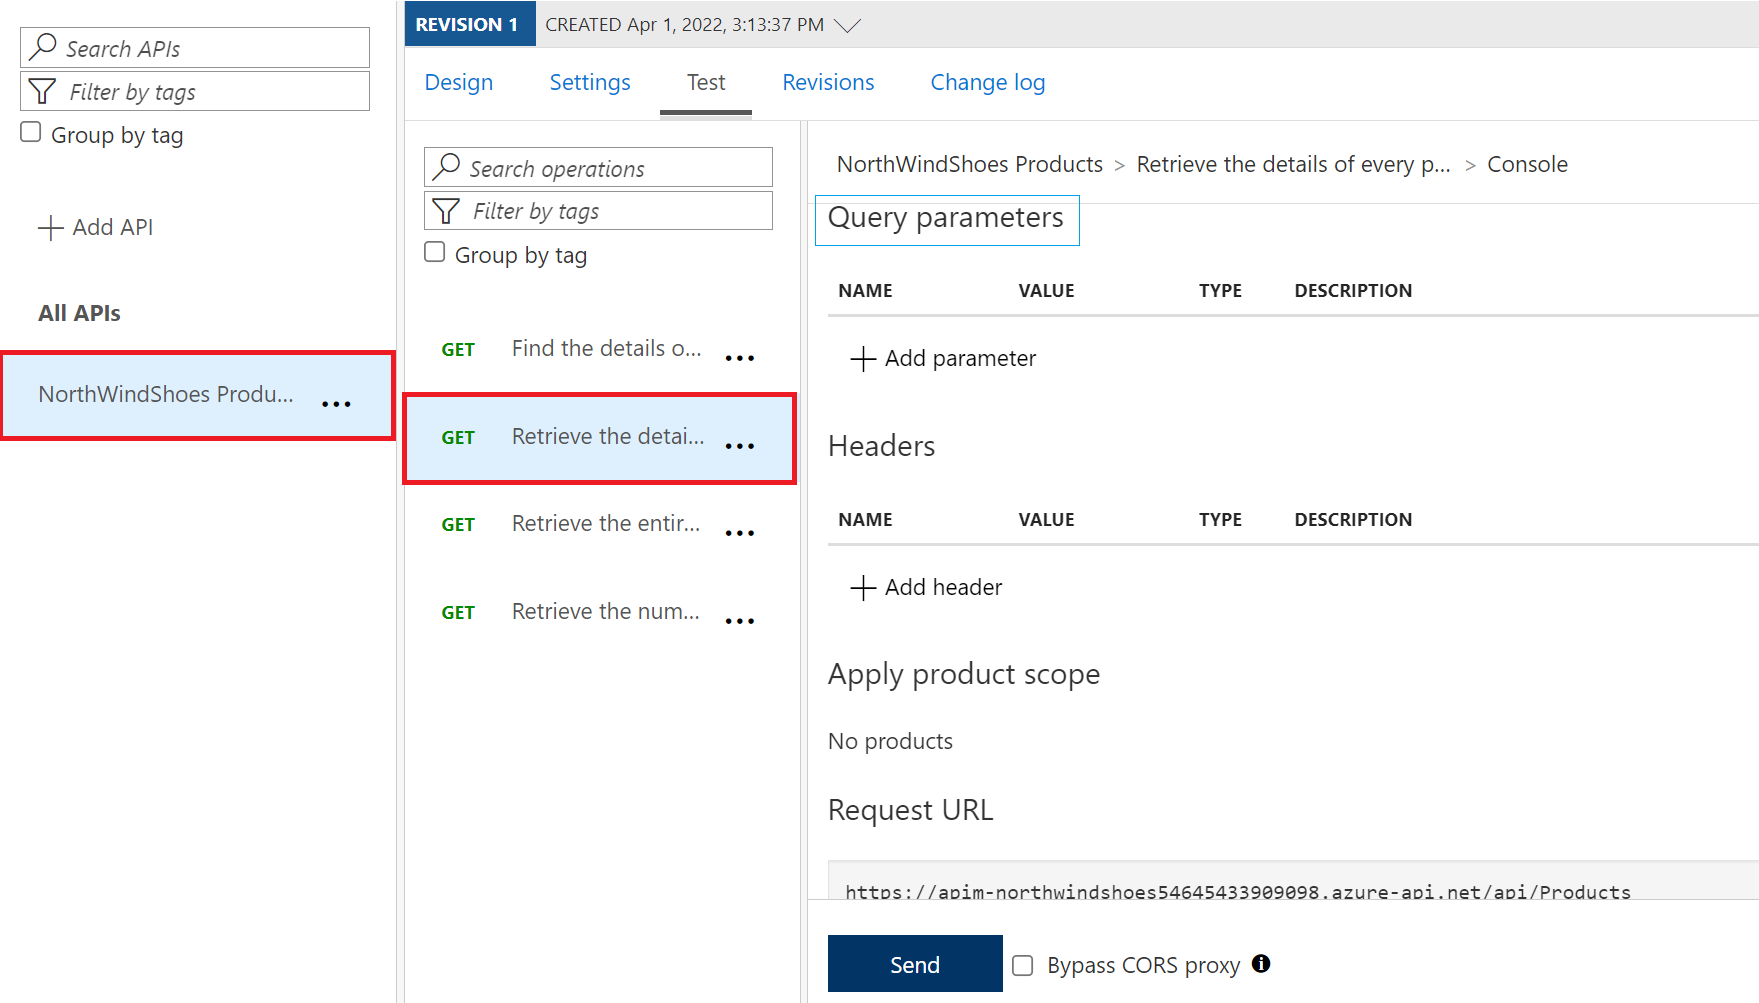 Screenshot of Azure portal API configuration showing a highlighted GET request test on an imported API.